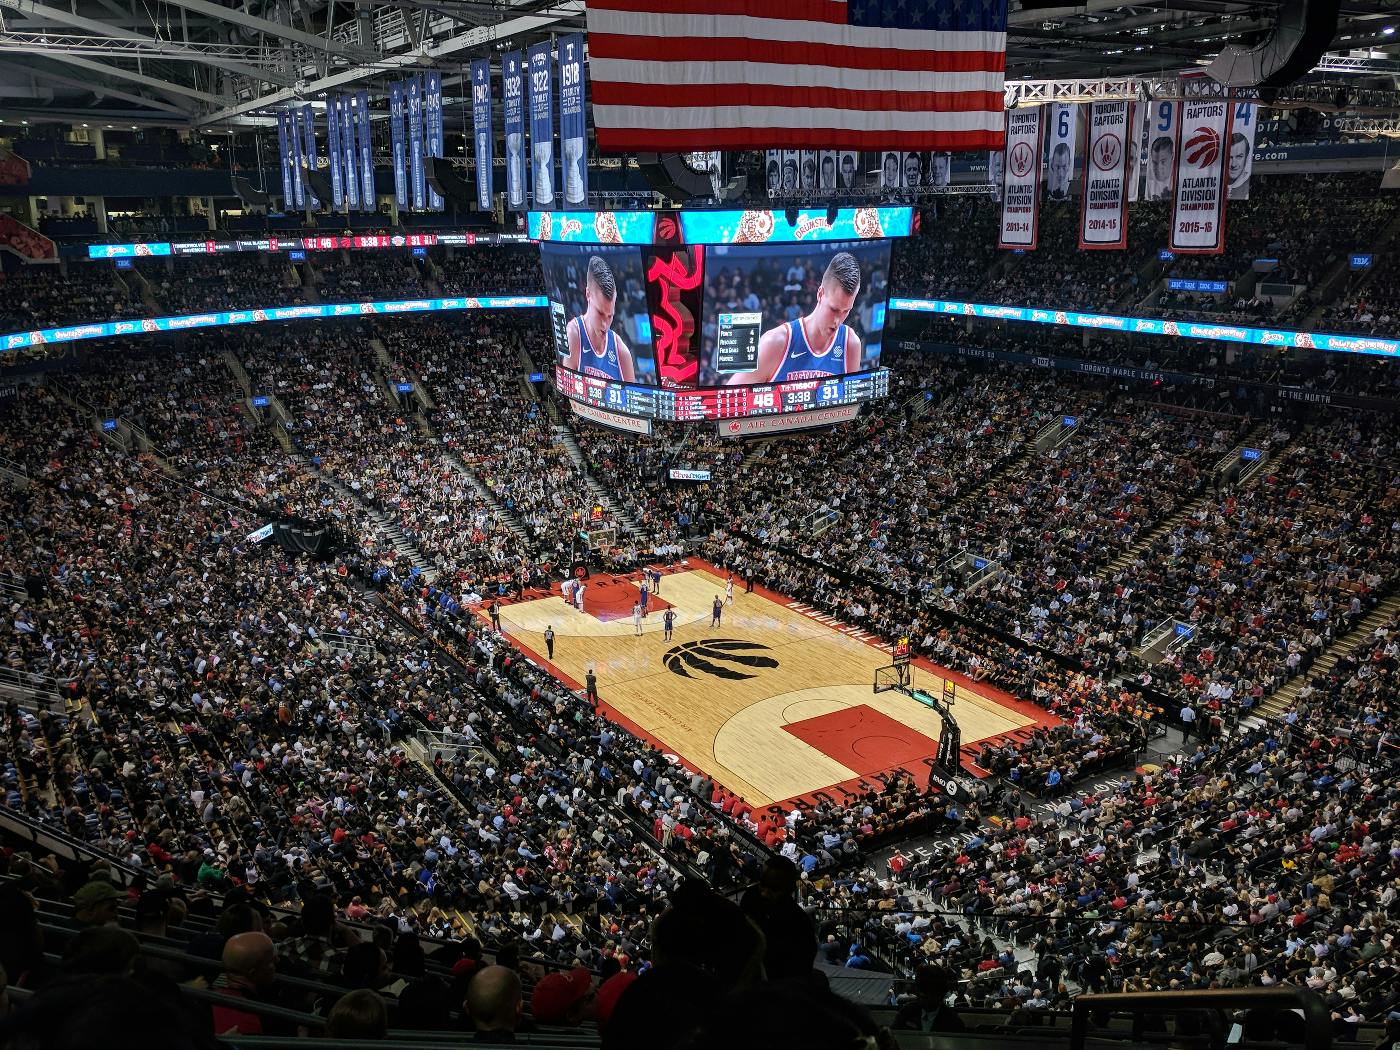 crowd at the Scotiabank Arena watching the Raptors play basketball